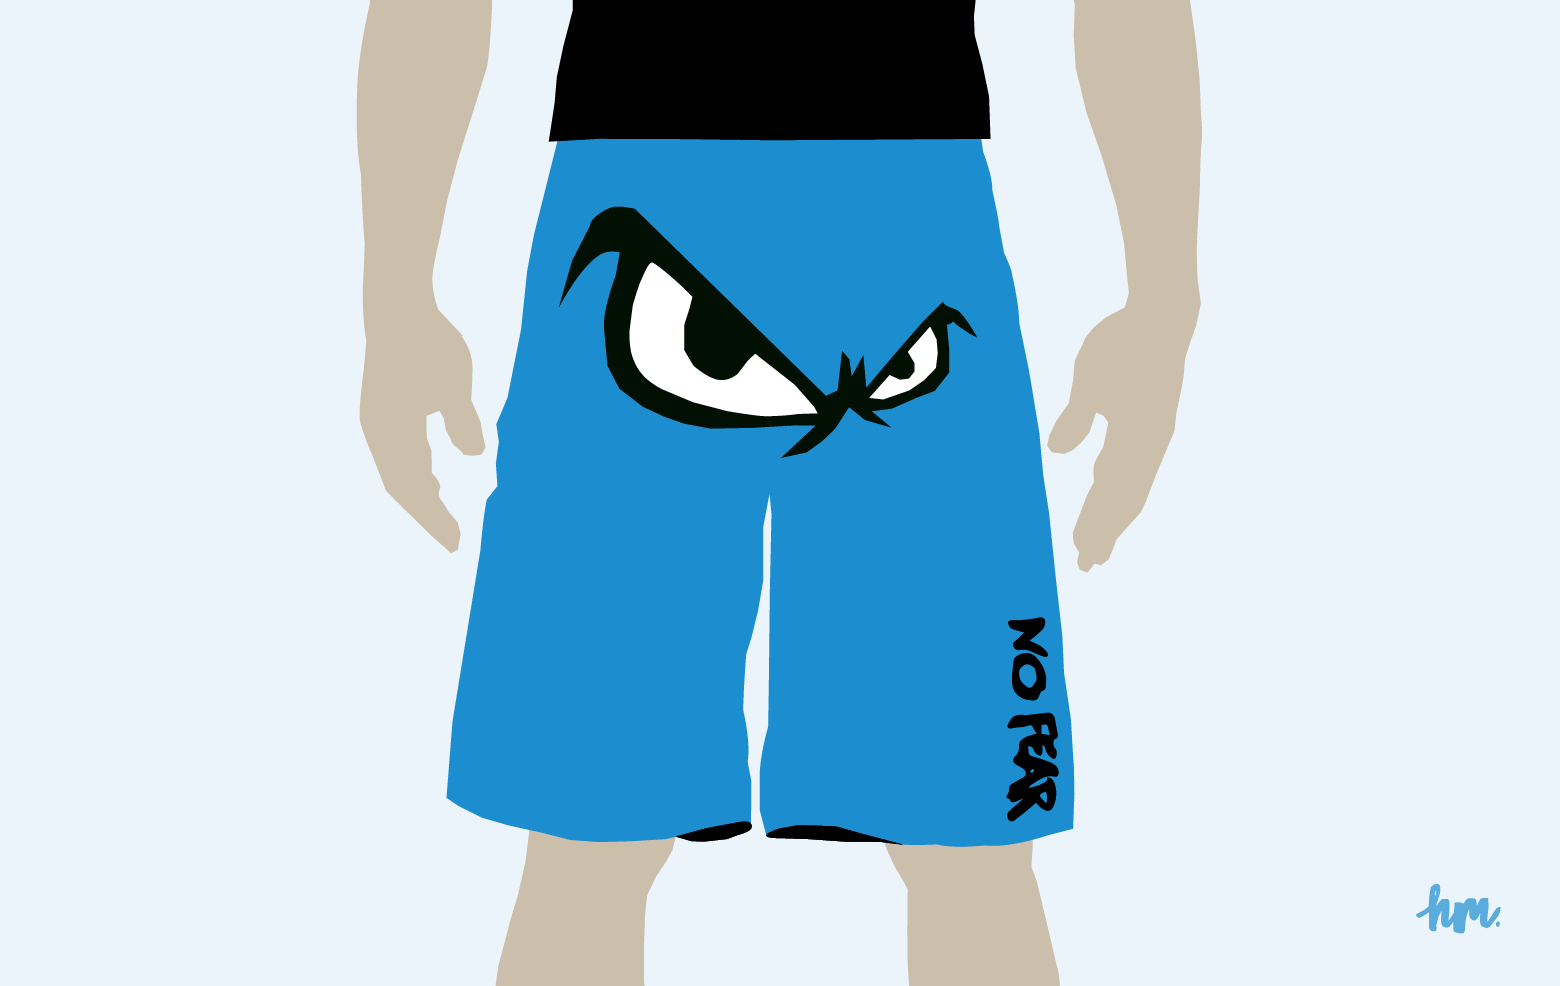 Illustration of a man wearing board shorts that have large glaring eyes over the crotch area and the words "No fear" on the leg.